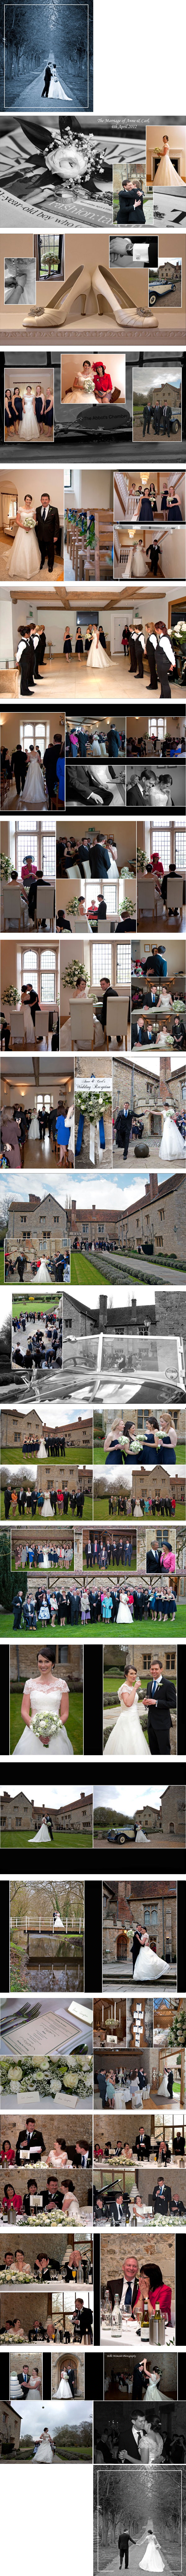 Anne & Carl's Wedding day at Notley Abbey.